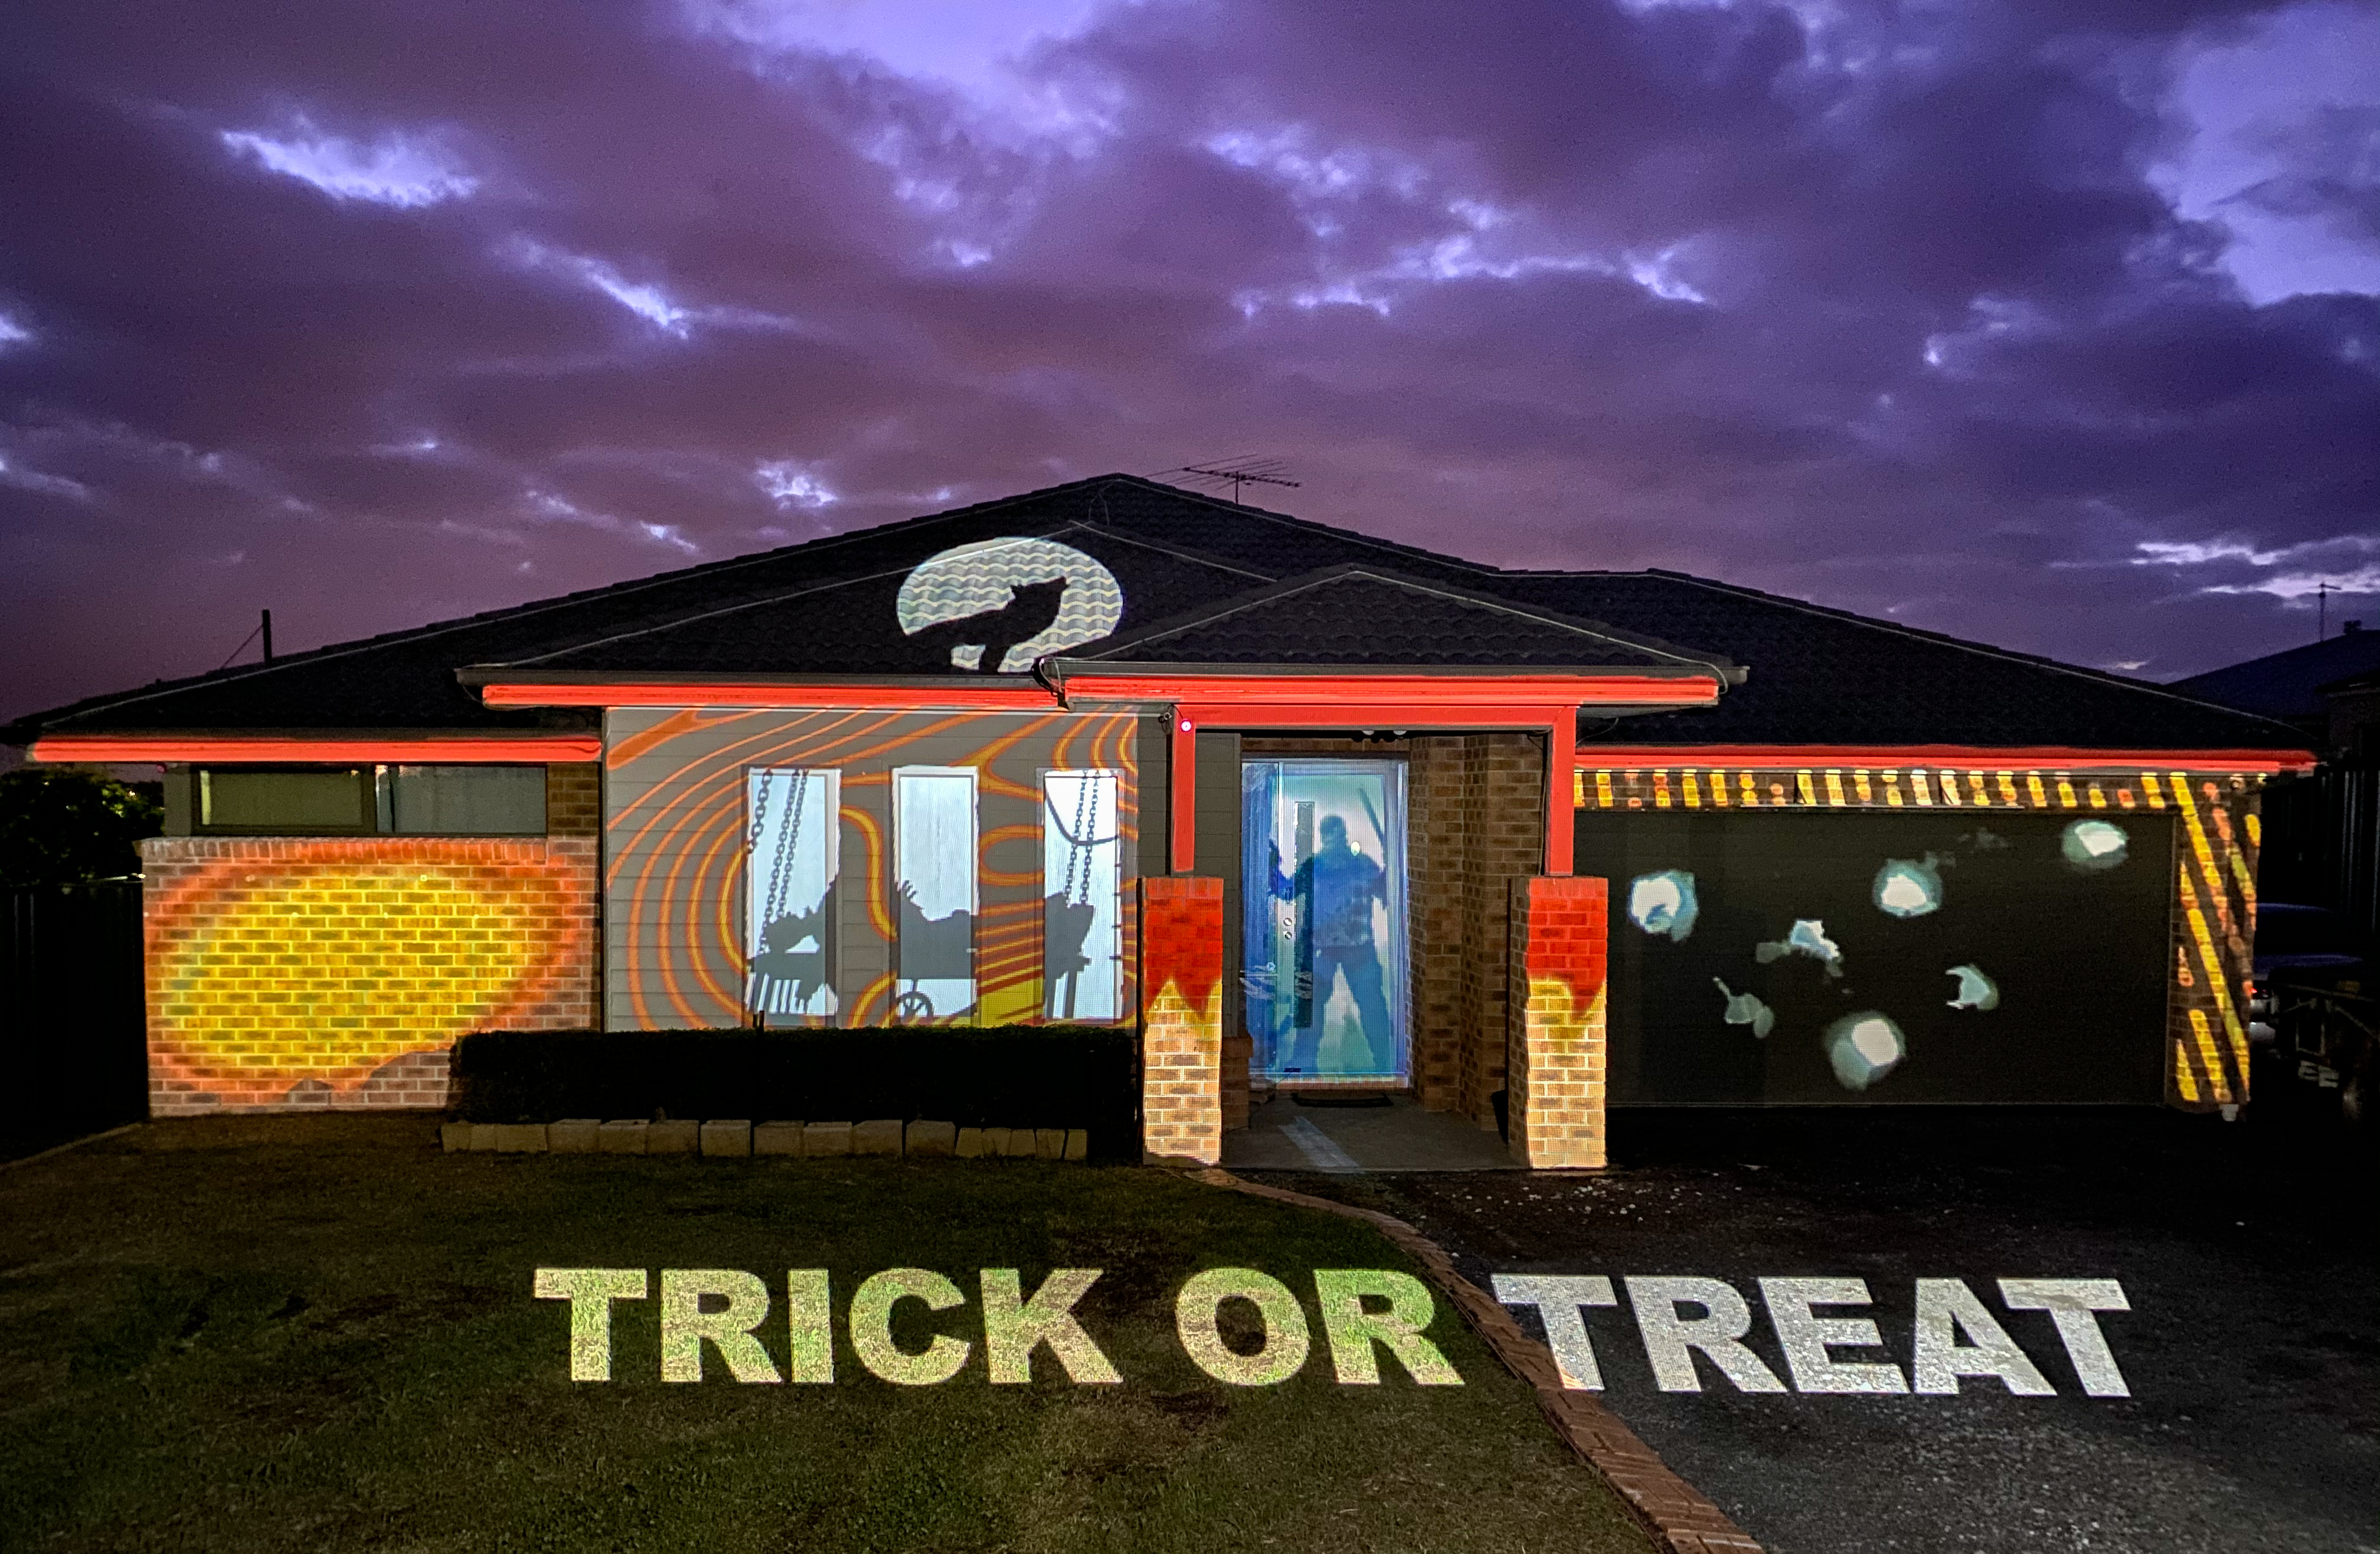 Halloween projection mapping on a house using the LFC Kit with the Optoma W460ST Projector.